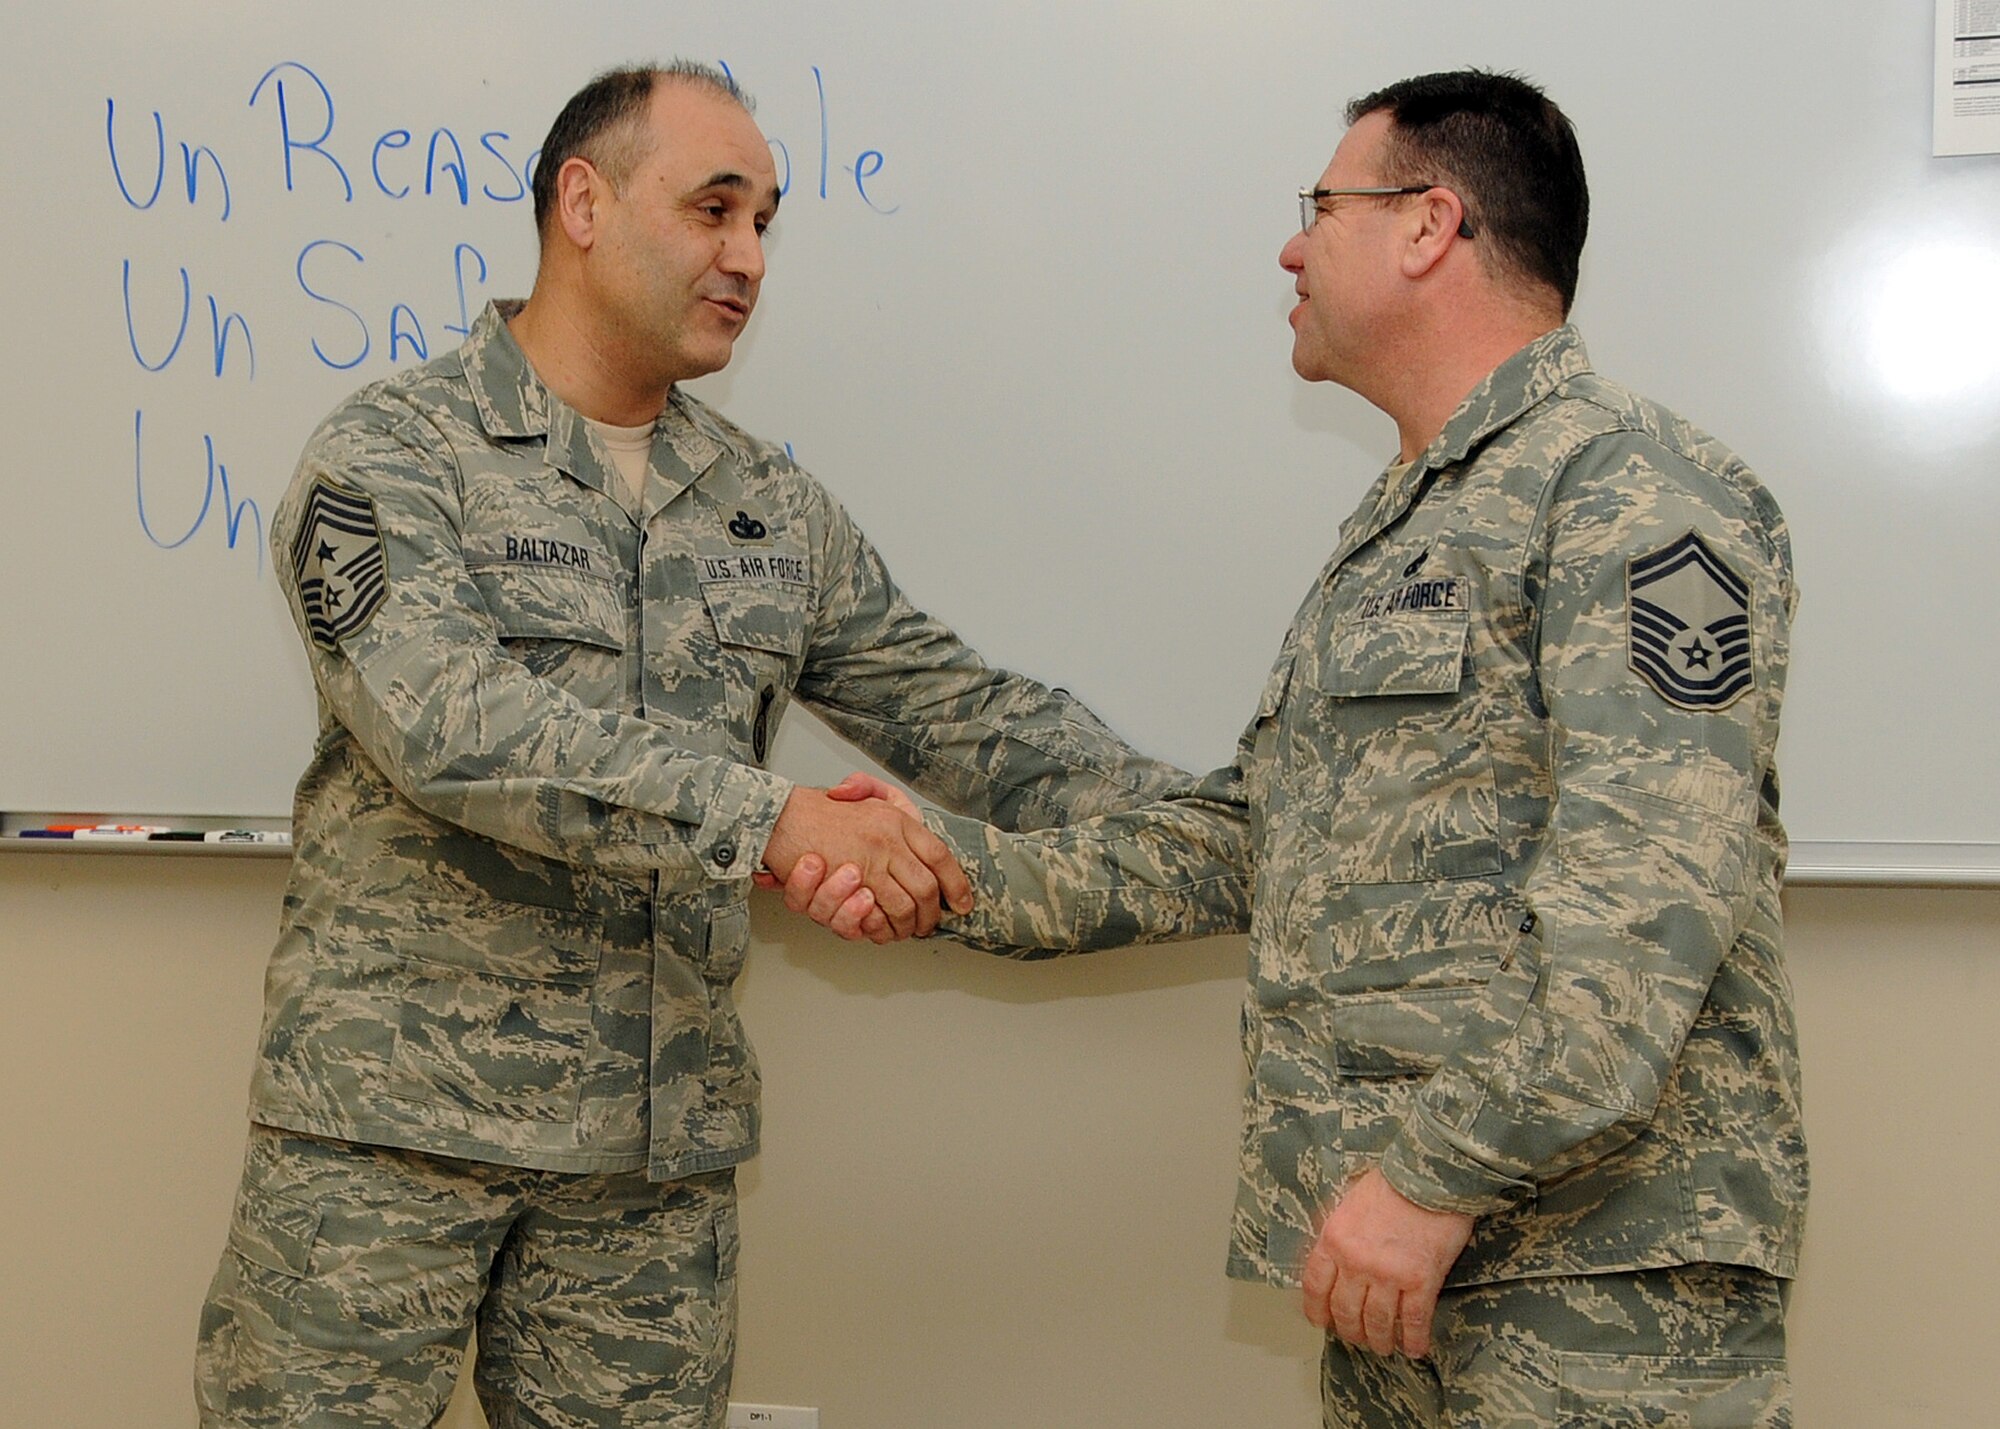 Command Chief Master Sergeant Jose Baltazar, Command Chief, 143d Airlift Wing, Rhode Island Air National Guard, presents Senior Master Sergeant Joseph Hart, Human Resource Advisor, 143d AW, with a challenge coin for his role in preparing for, executing and instructing at the inaugural Leadership Development Course held at Quonset Air National Guard Base, North Kingstown, Rhode Island on January 21, 2015. National Guard Photo by Master Sergeant Janeen Miller (RELEASED)